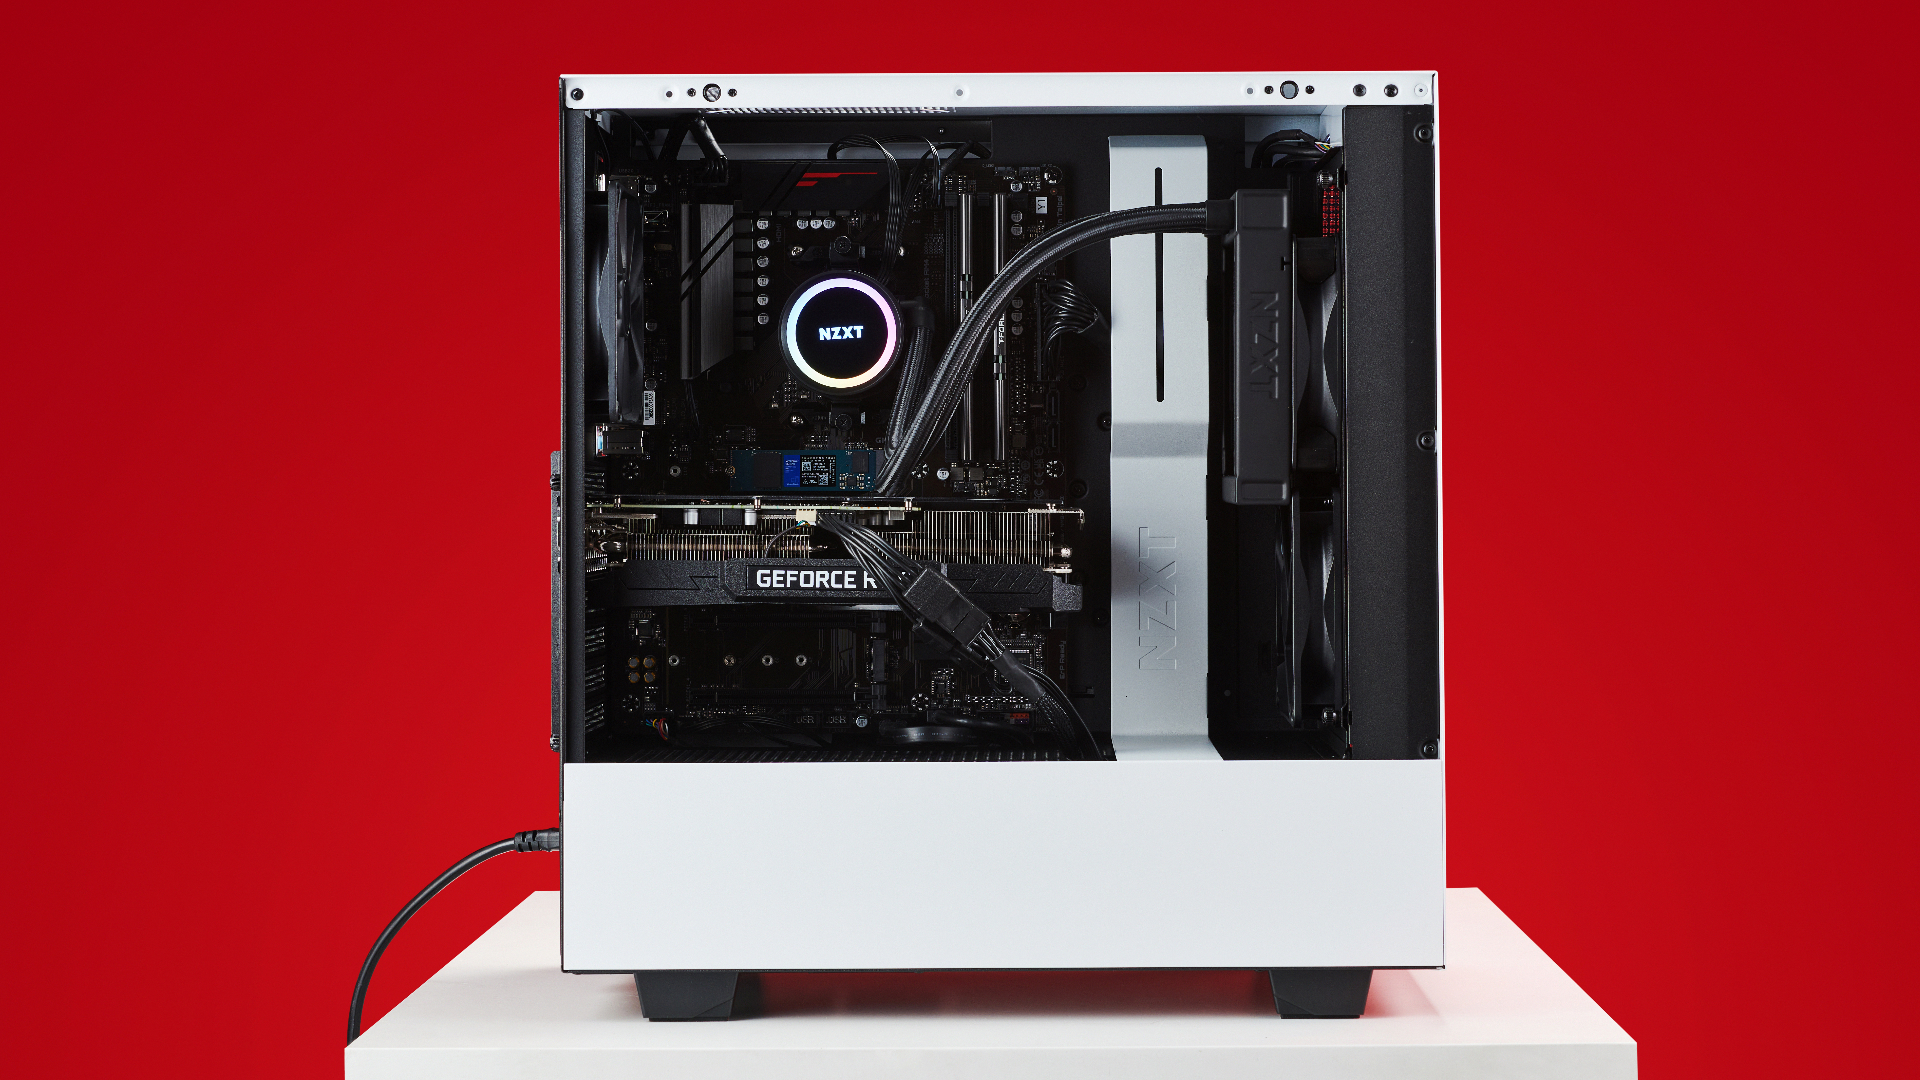 The turnkey NZXT gaming PC.